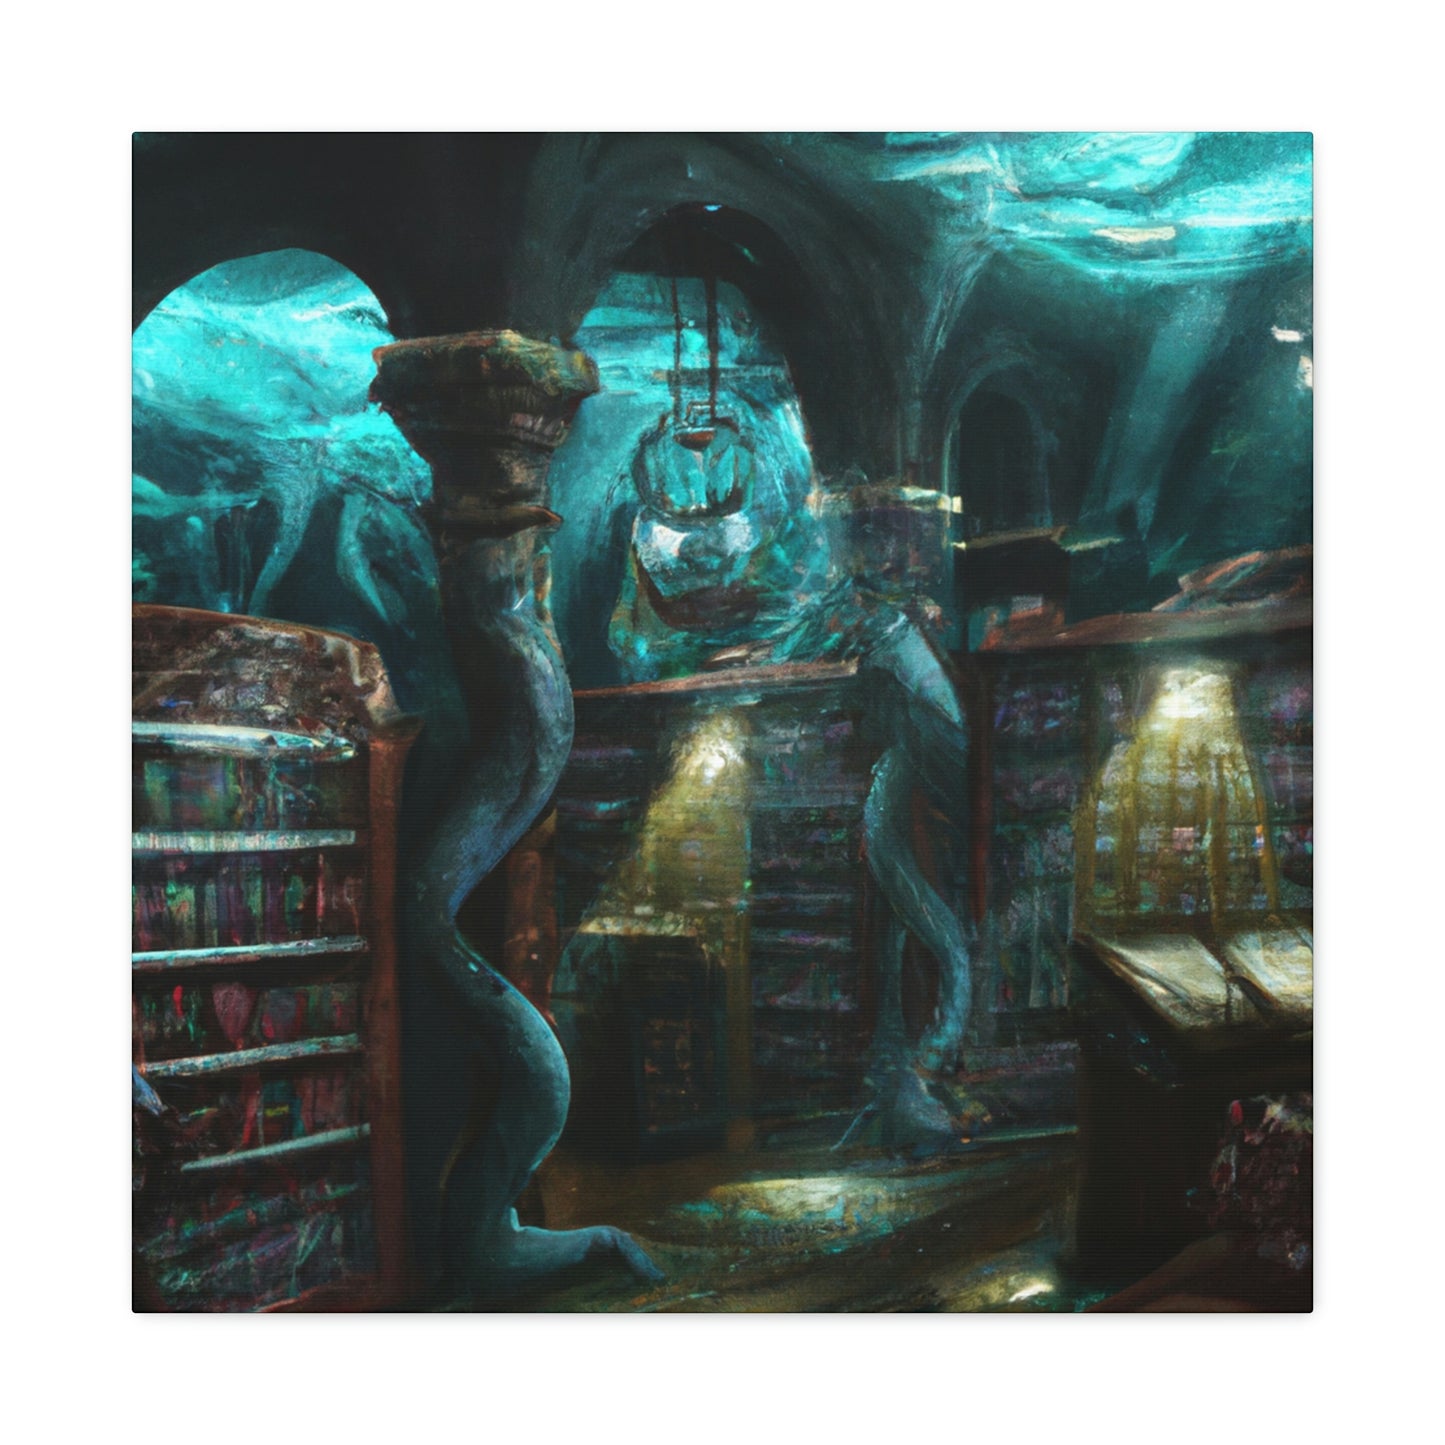 "The Forgotten Spellbook of the Deep" - The Alien Canva